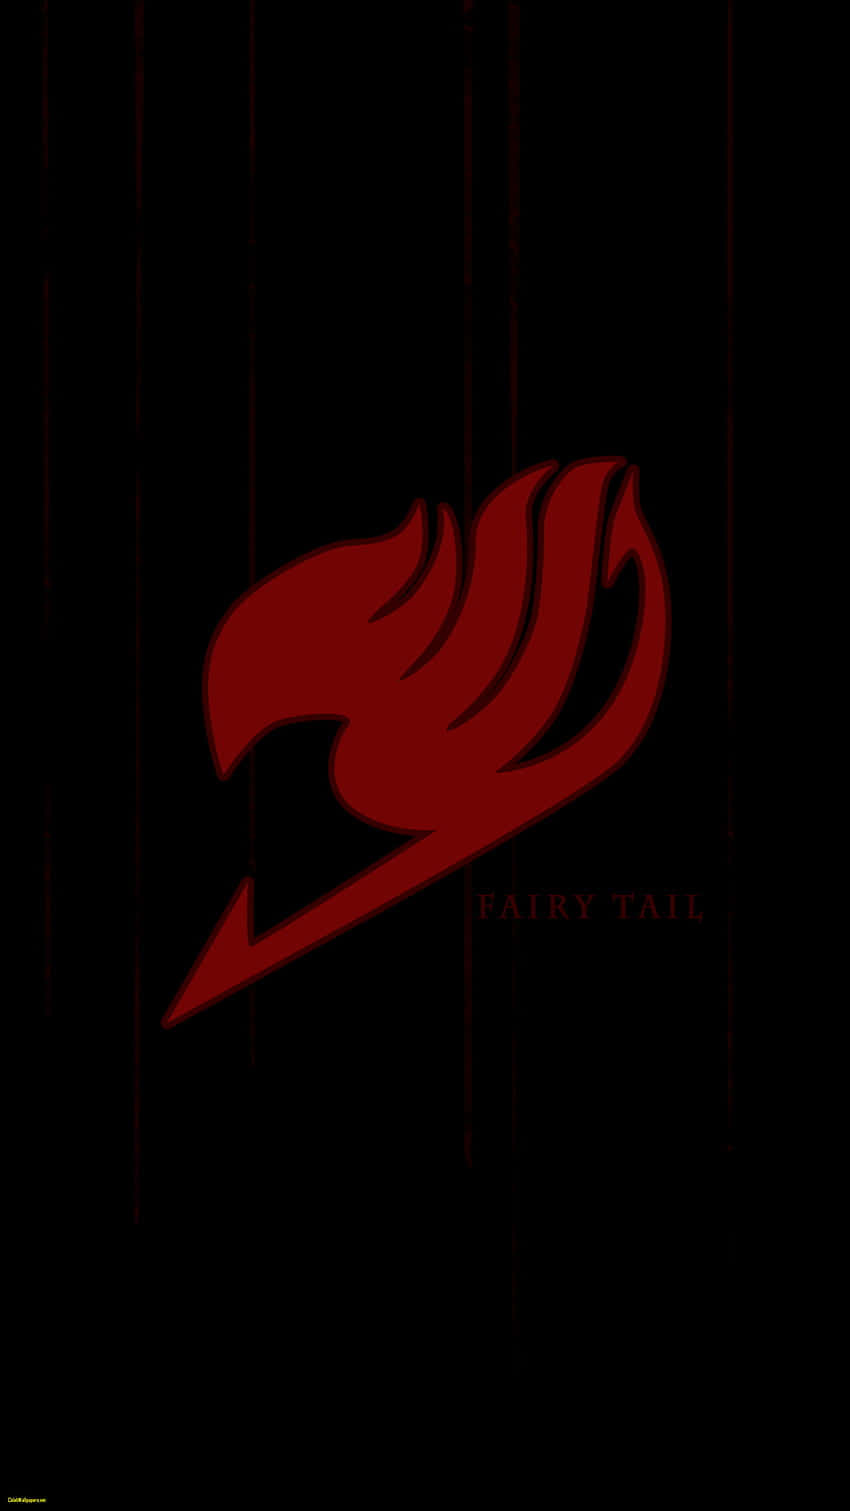 The dynamic logo of Fairy Tail, set amidst stars and fire. Wallpaper